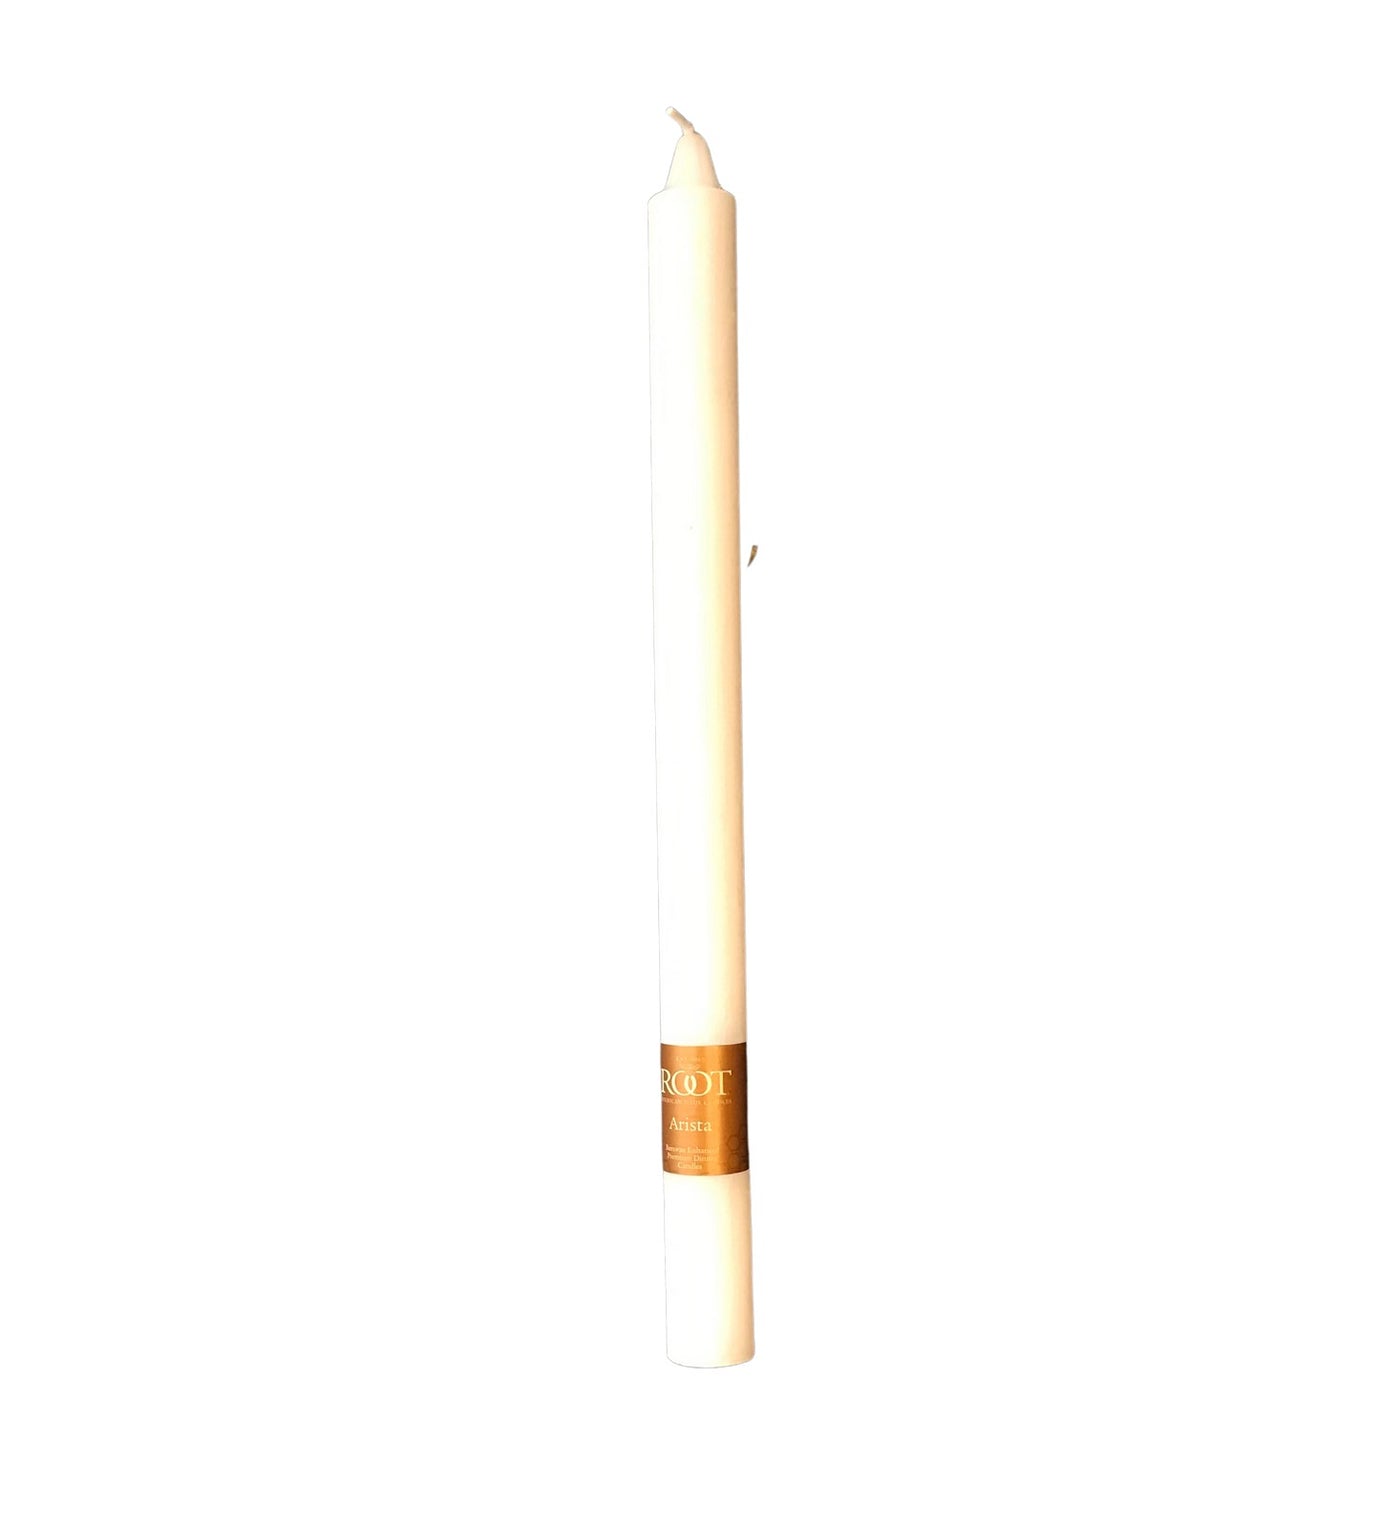 Timberline Arista White Candle 12"